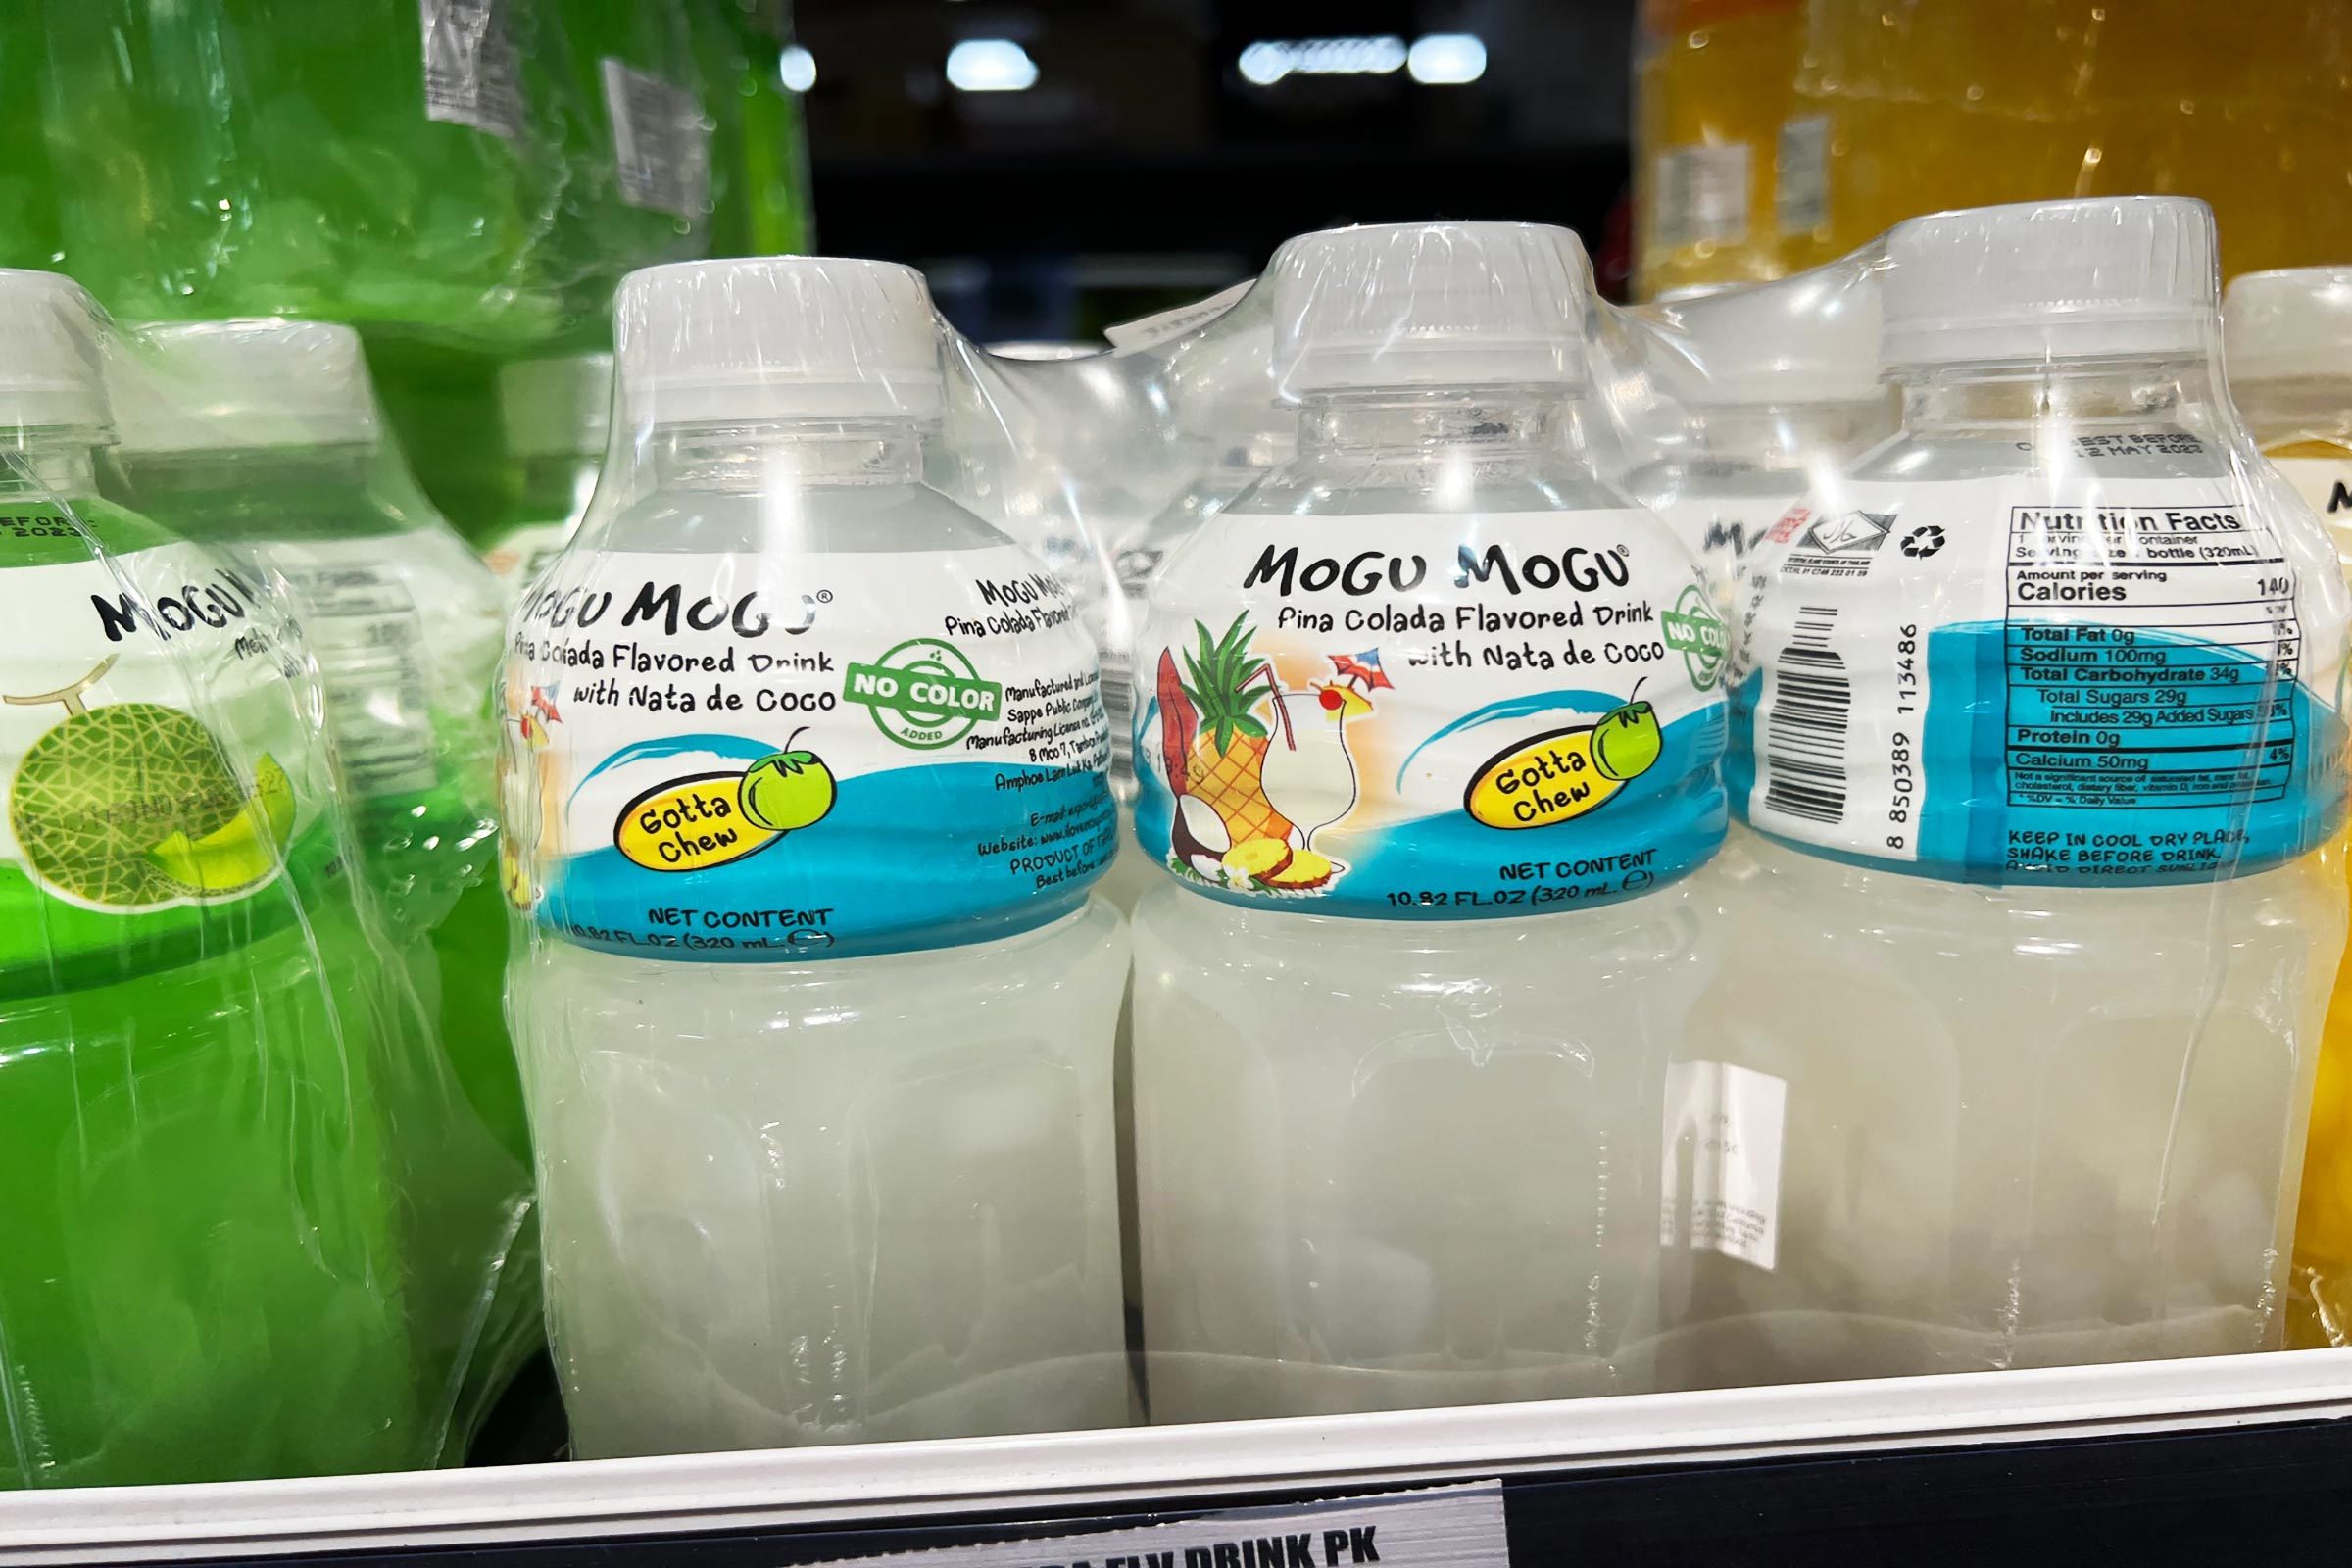 We Tried the Mogu Mogu drink and It's Delicious